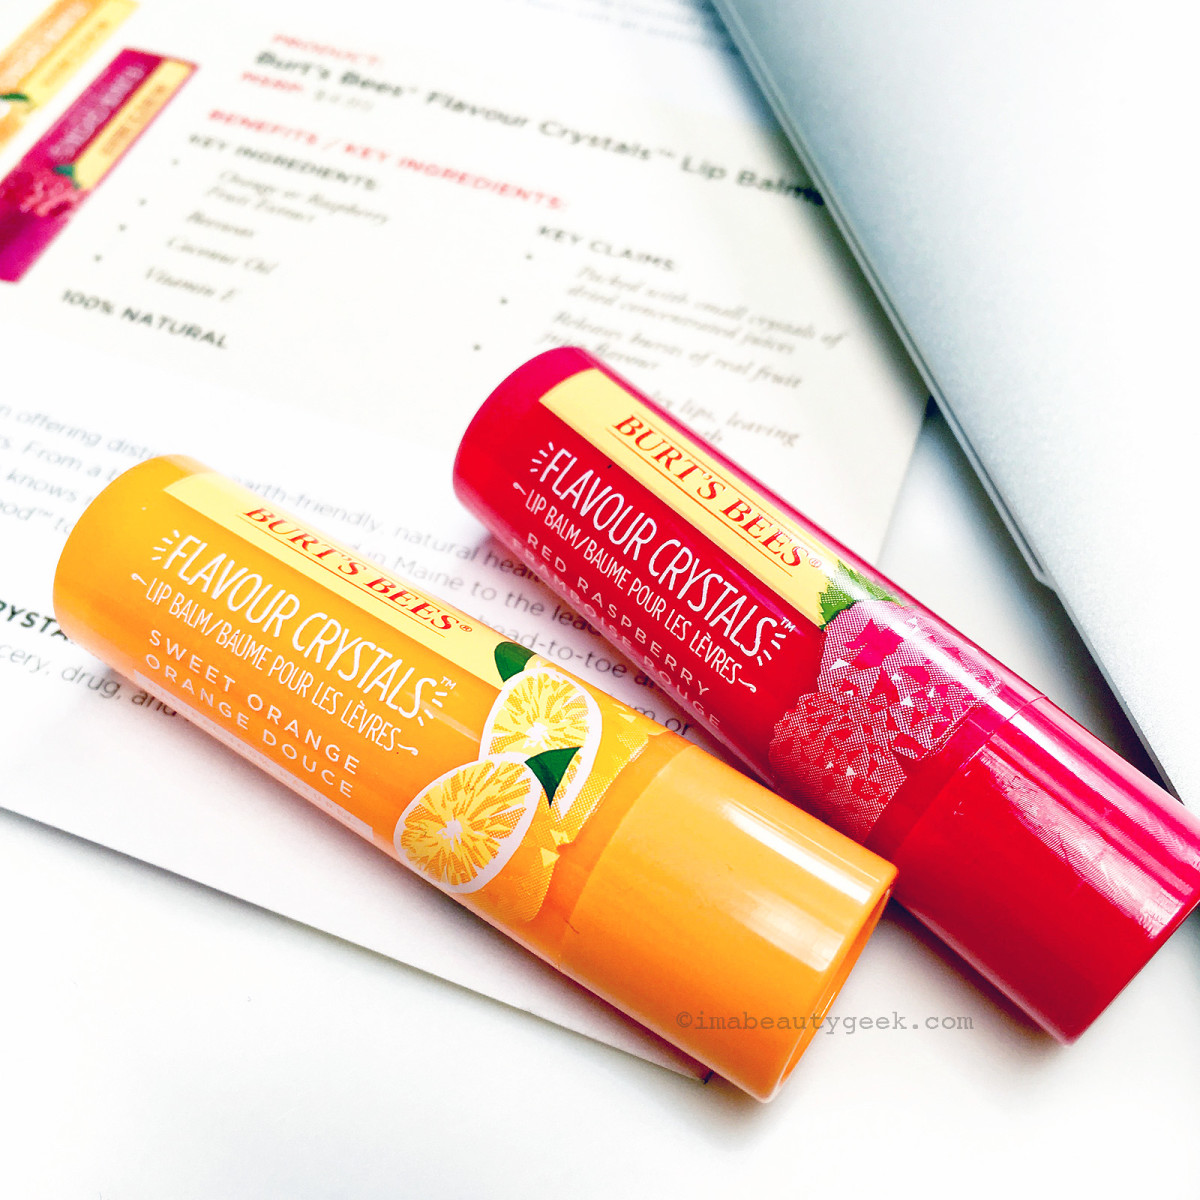 Burt's Bees Flavour Crystals Lip Balm in Sweet Orange and Red Raspberry: give 'em a chance.